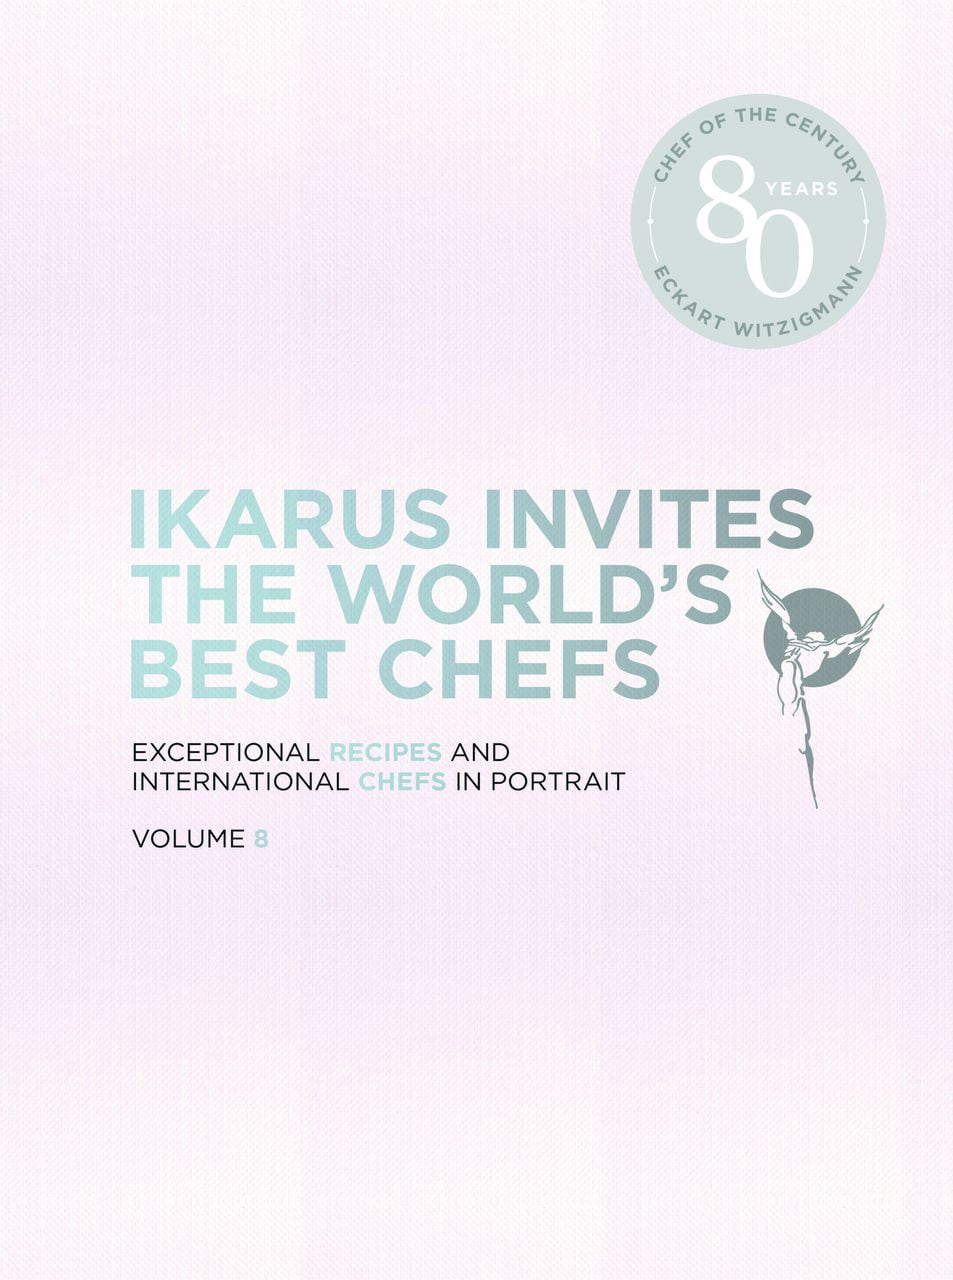 Ikarus Invites The World's Best Chefs.  	Exceptional Recipes and International Chefs in Portrait: Volume 8, EAN/ISBN-13: 9783967040289